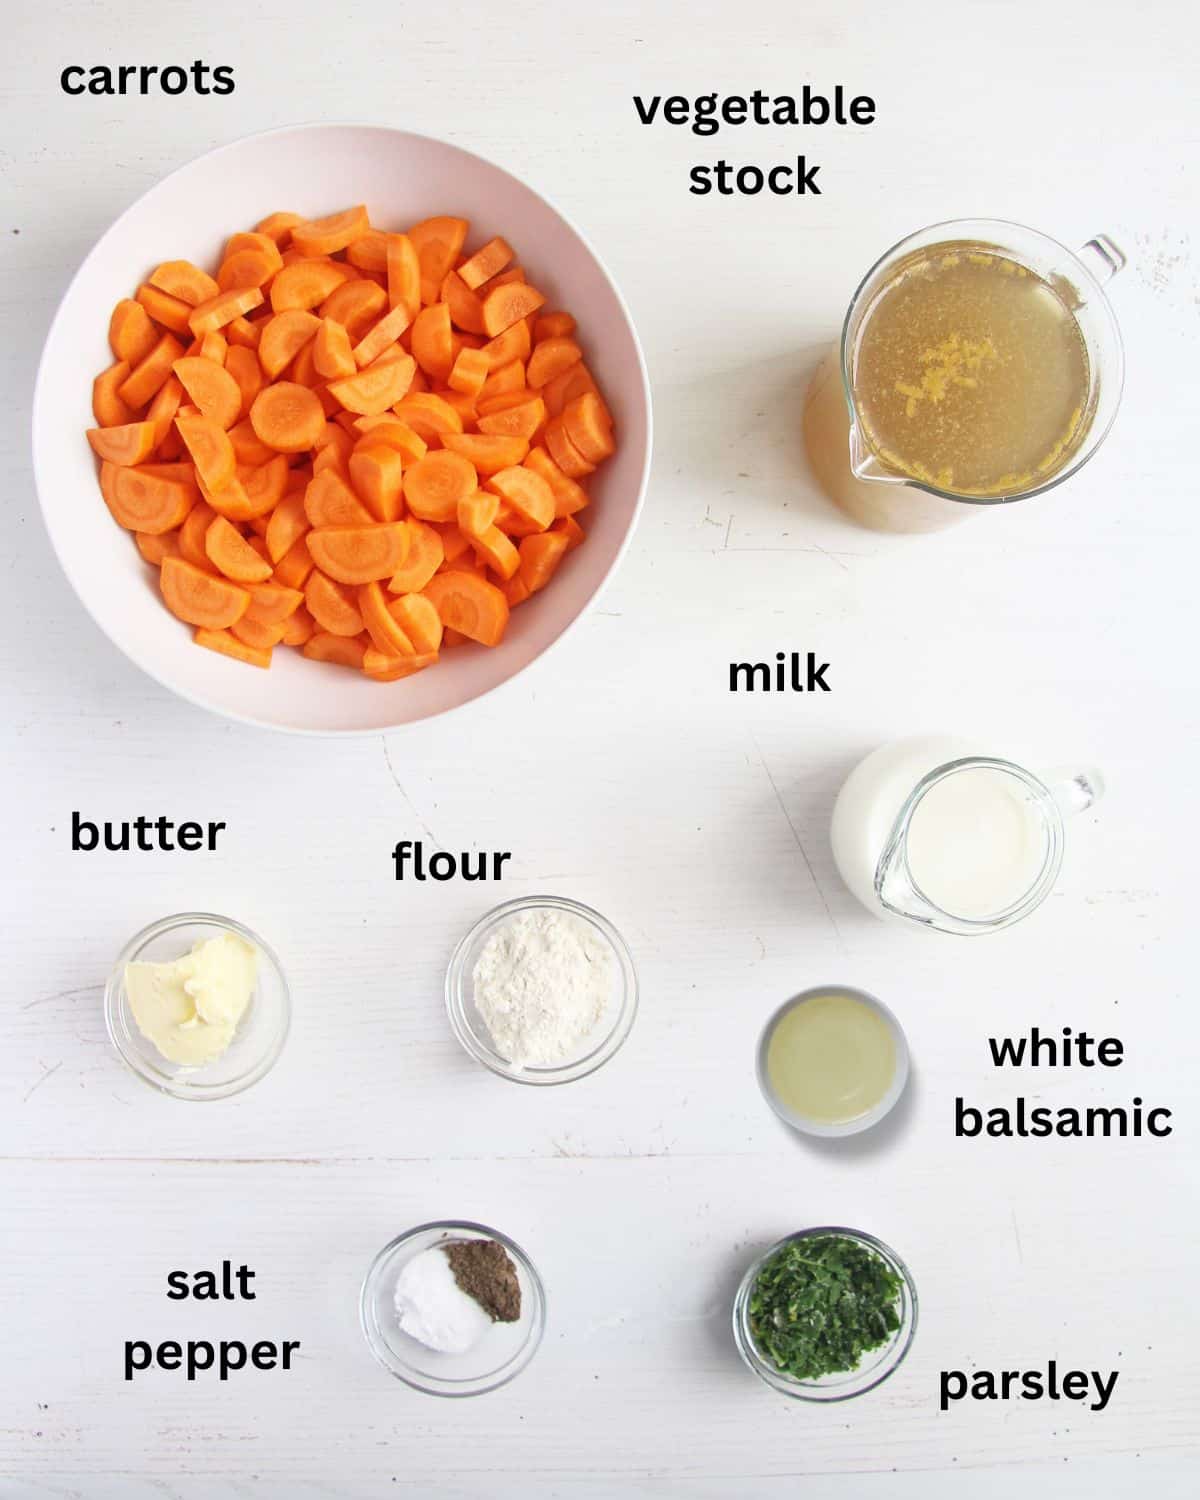 labeled ingredients for making carrot soup with milk and roux.